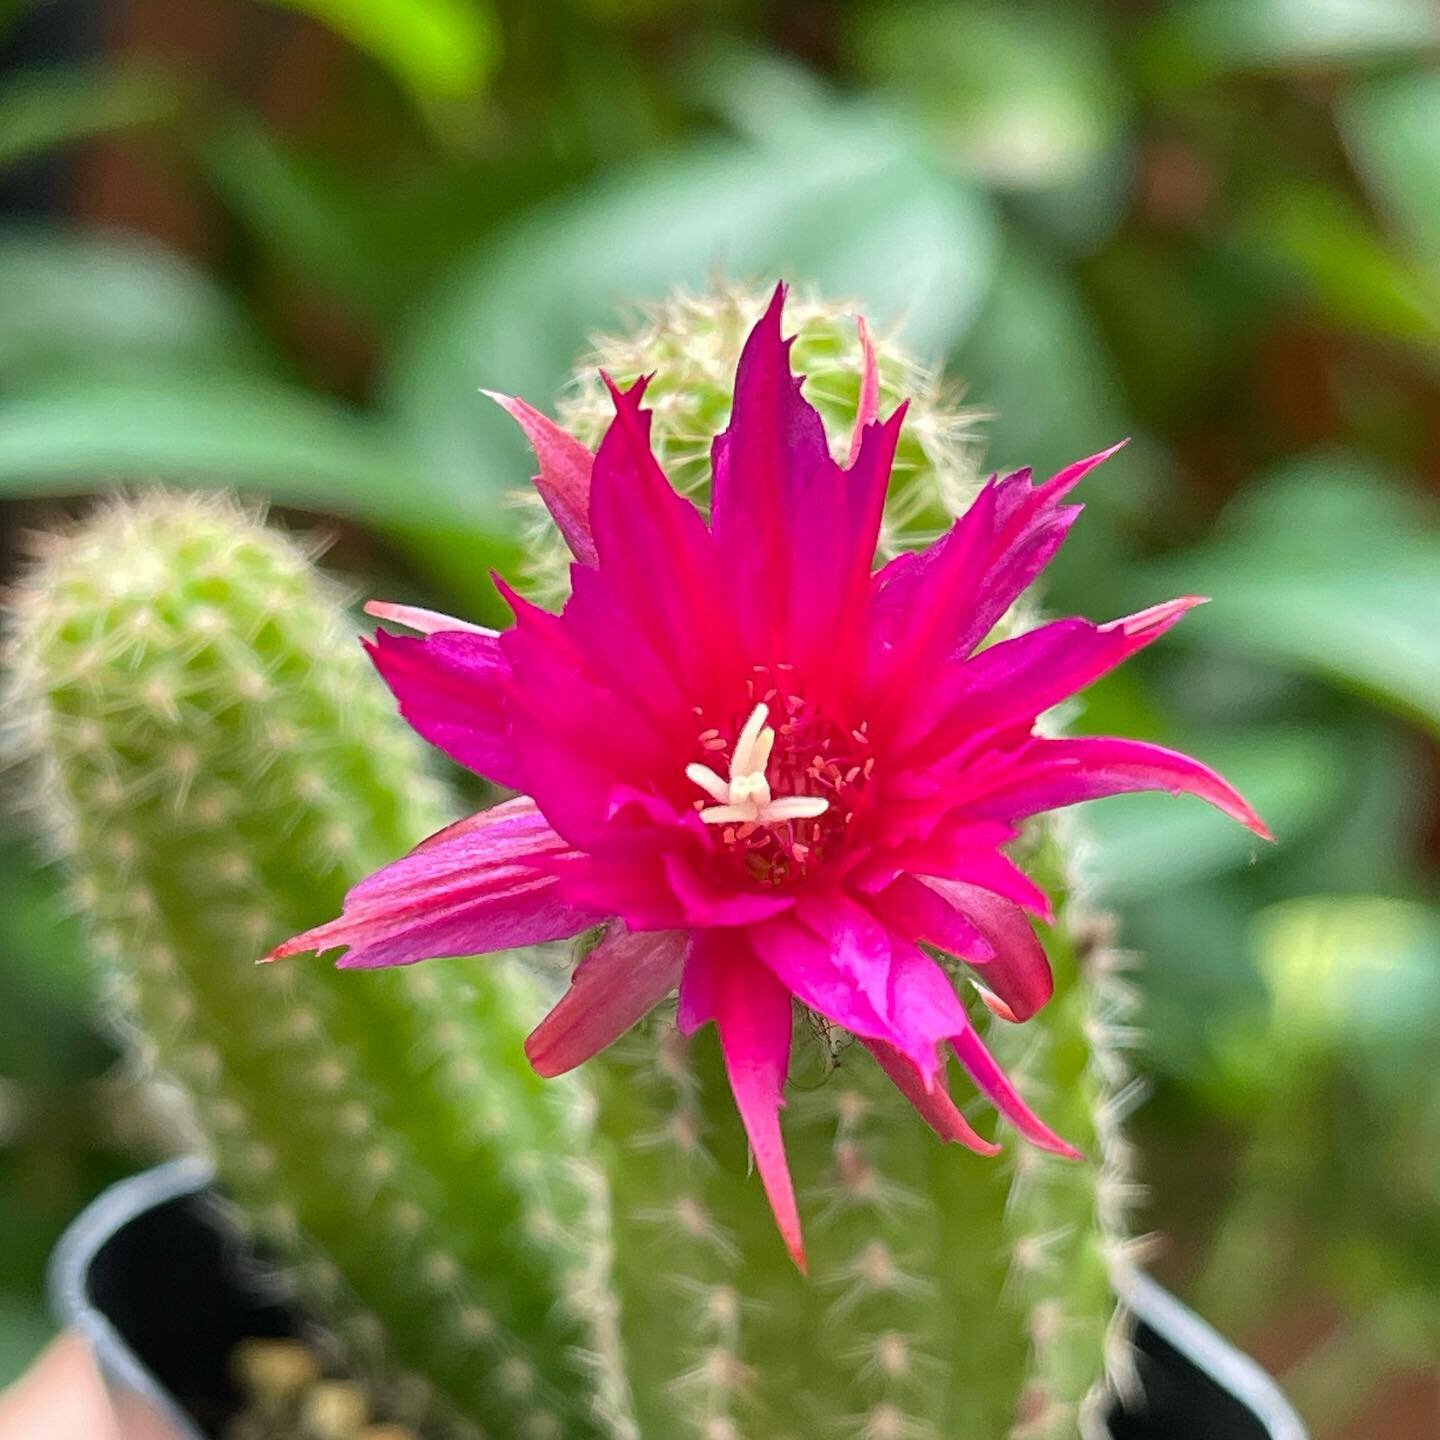 Bloom where you&rsquo;re planted! These cactuses have been sneaking up on us lately - the minute we take our eyes off them, BOOM they bloom. Life&rsquo;s like that sometimes. Quiet and steady and then a burst of color and surprise. Come catch the sup